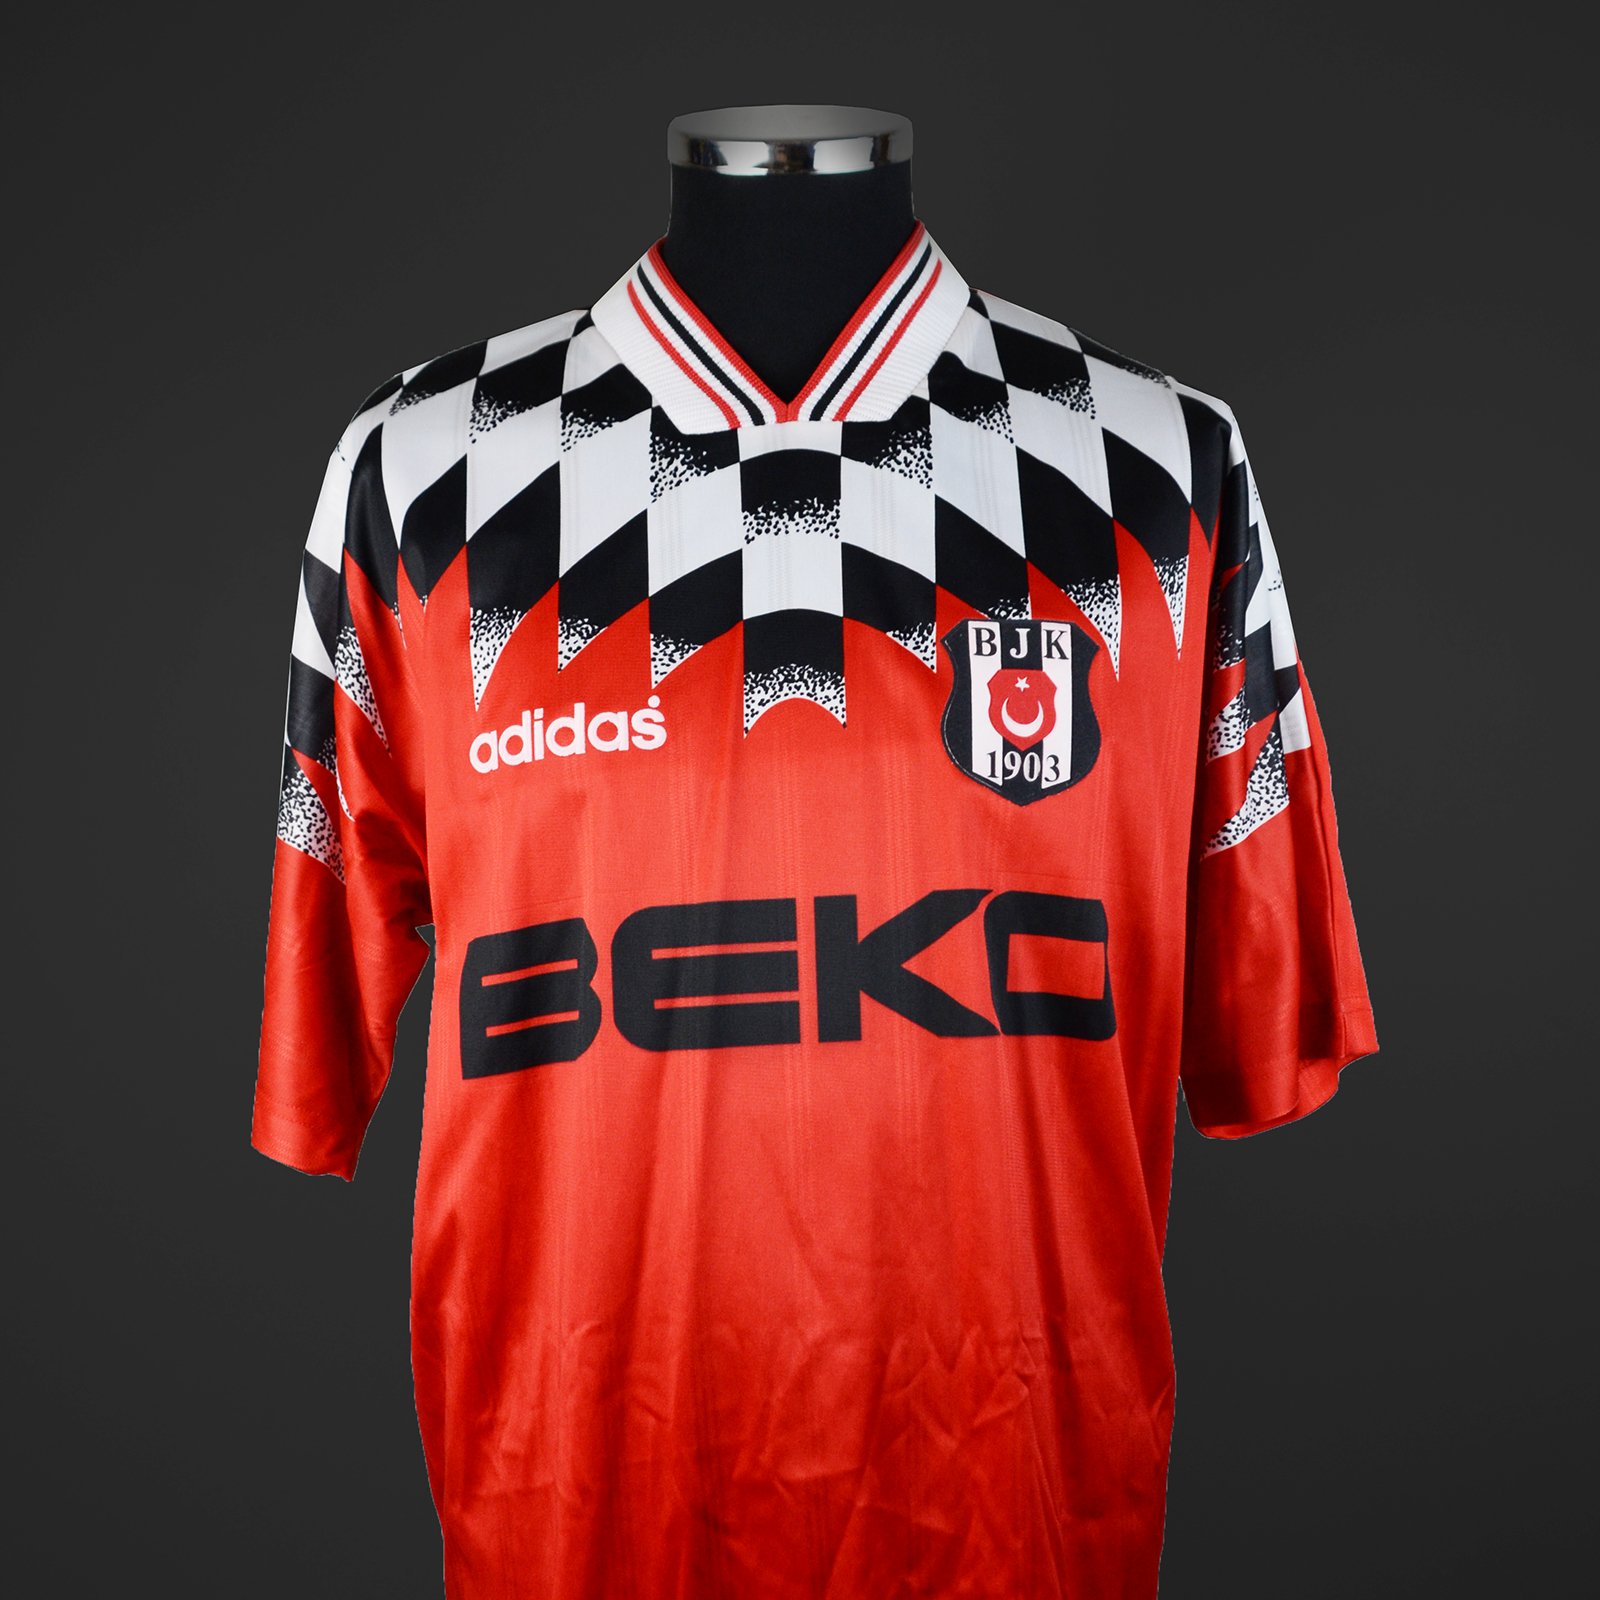 Football Shirts on Twitter: "The best of Adidas 1994 Can you think of an else wore design? / Twitter